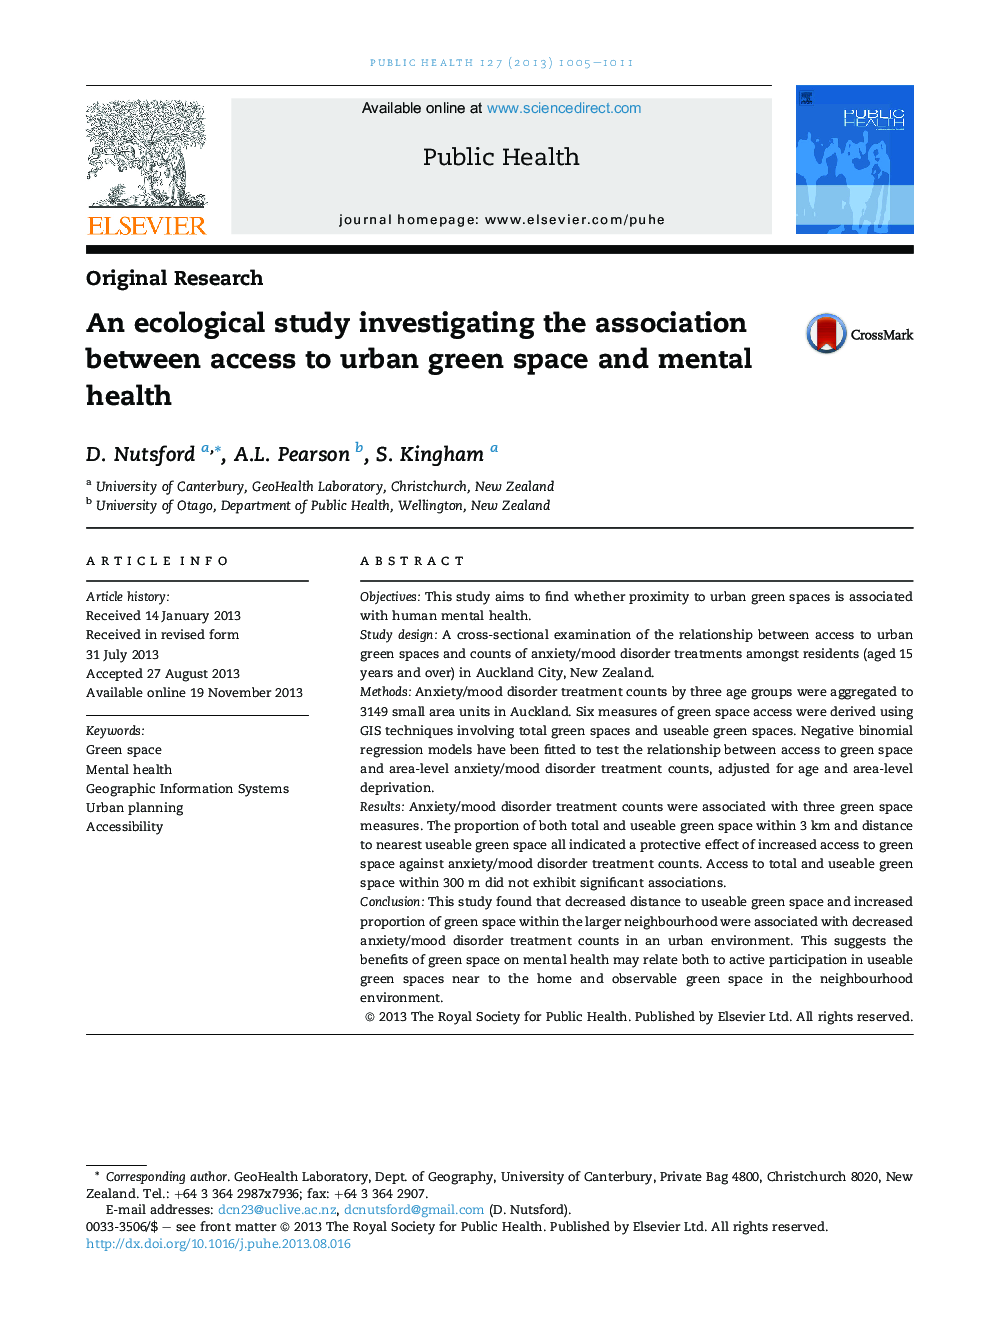 An ecological study investigating the association between access to urban green space and mental health